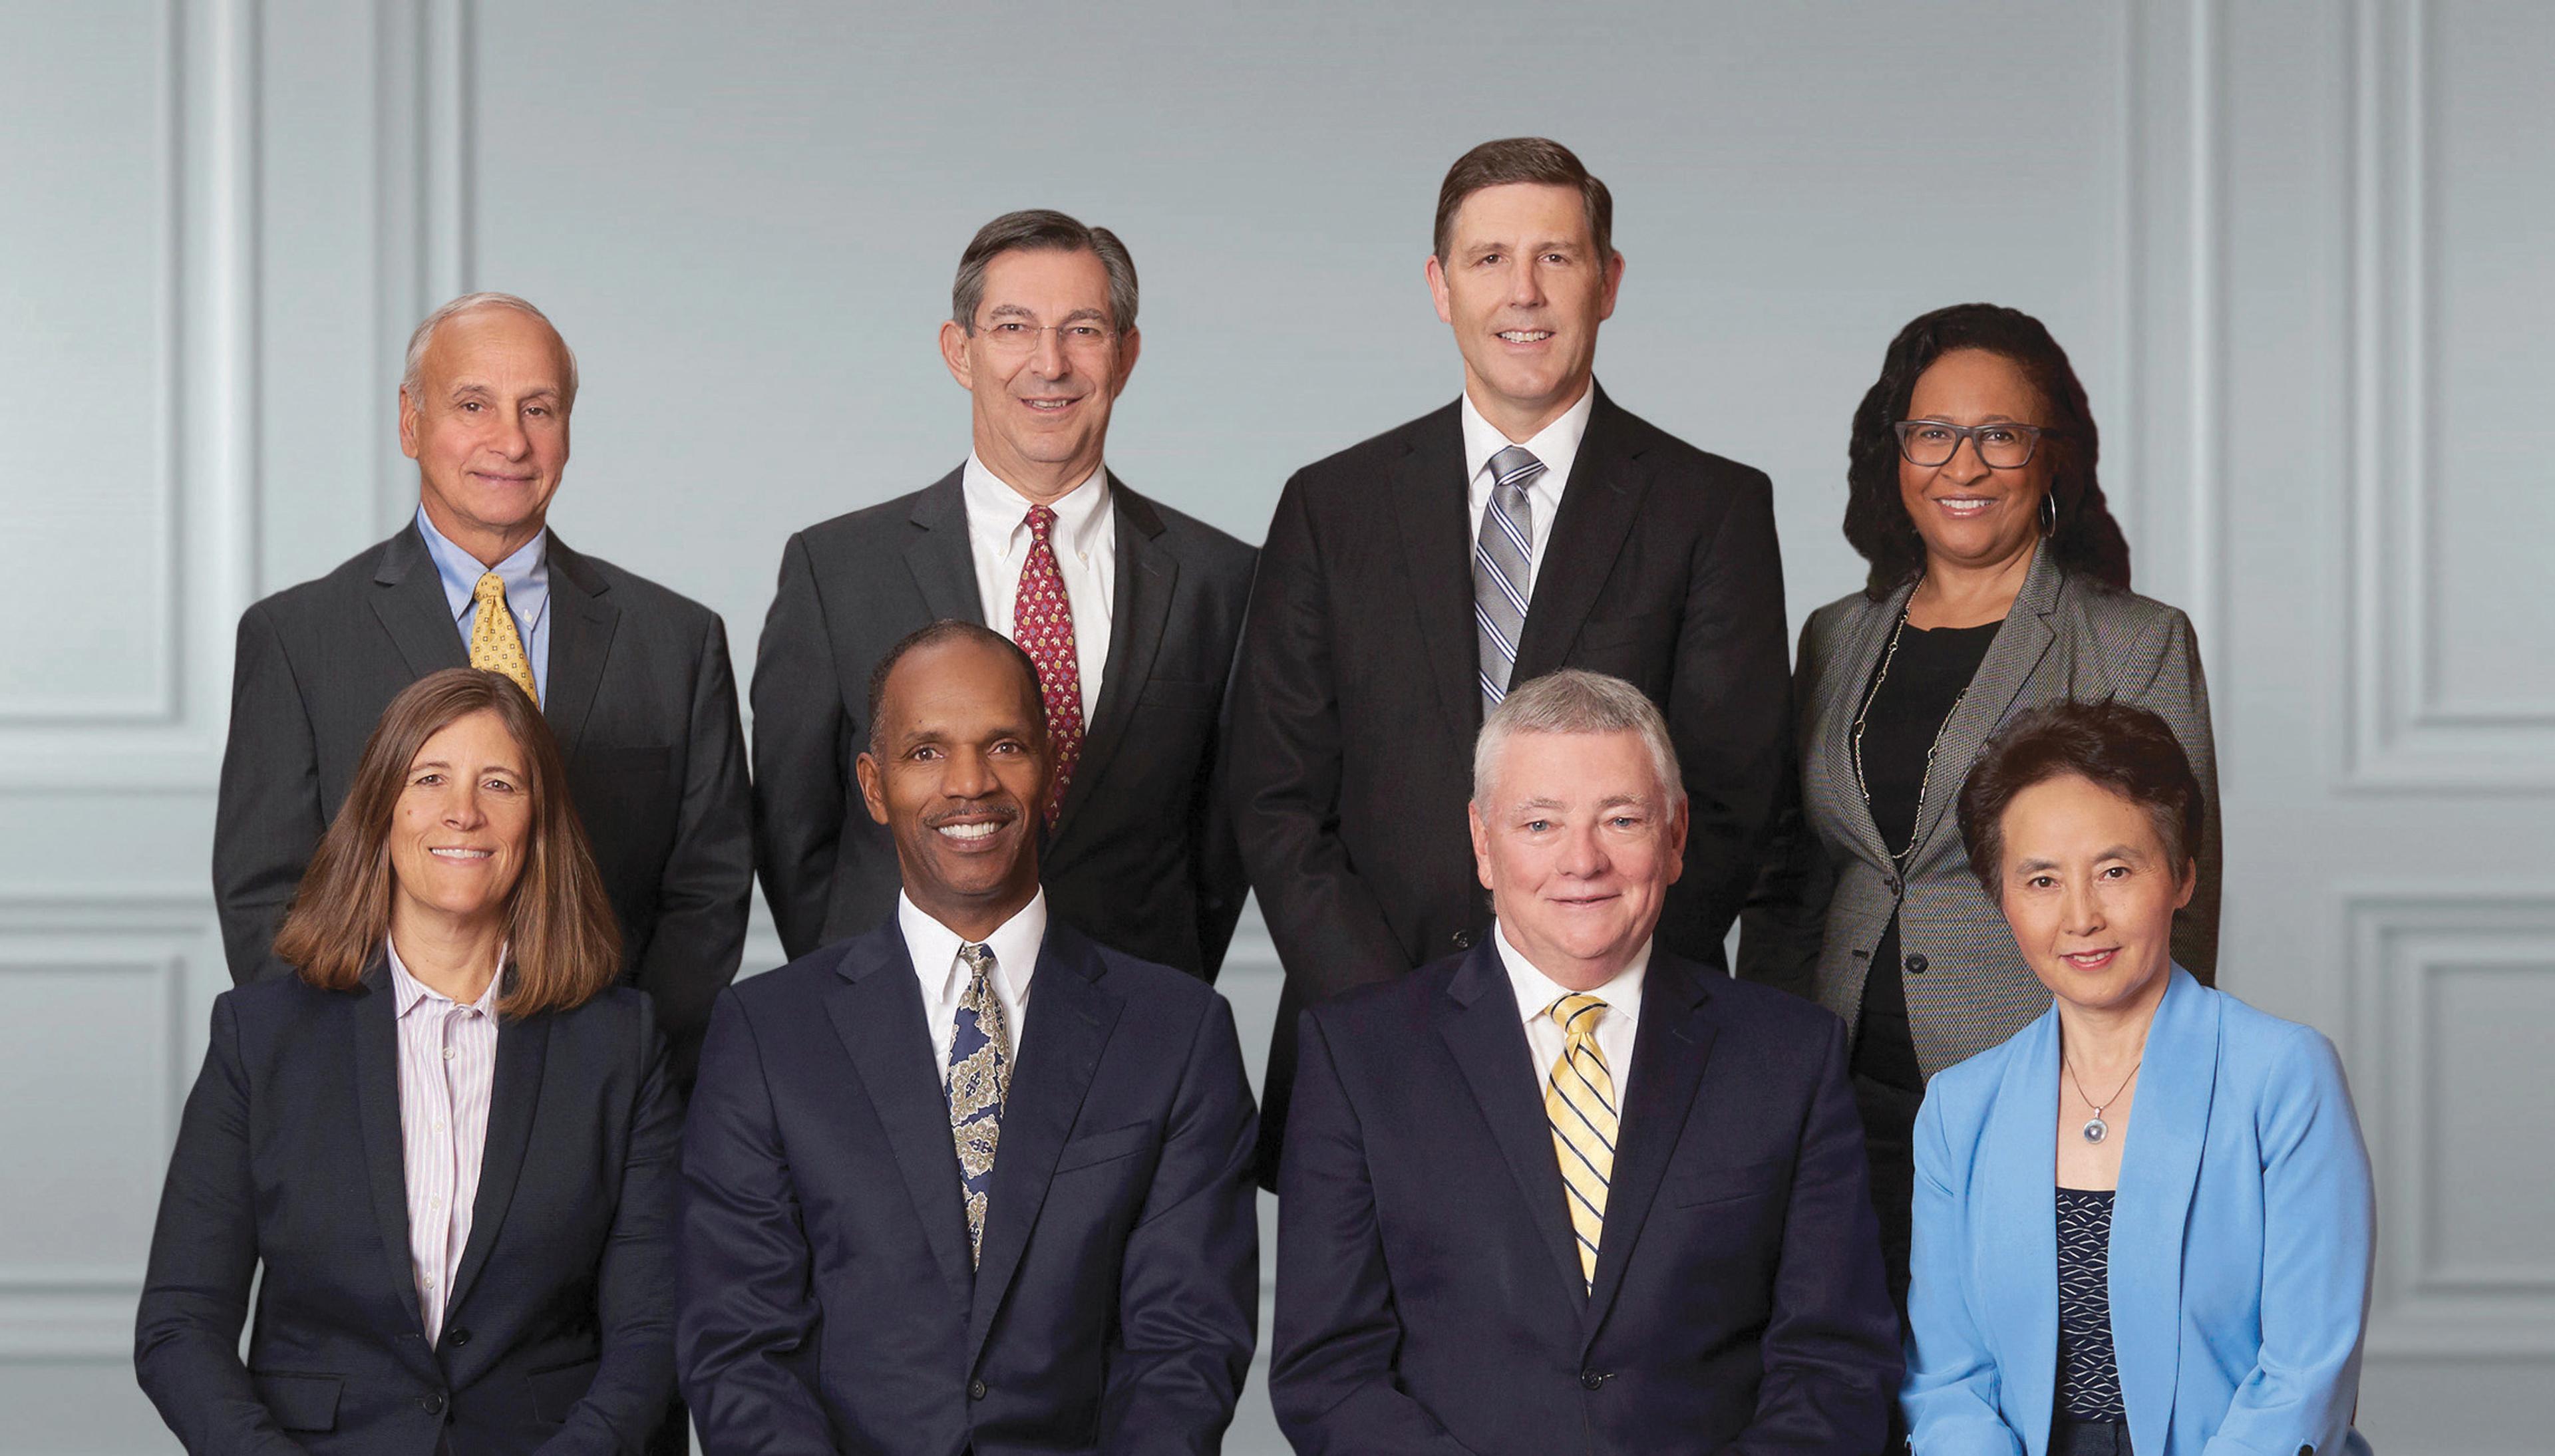 Koppers board of directors posing for a group photo